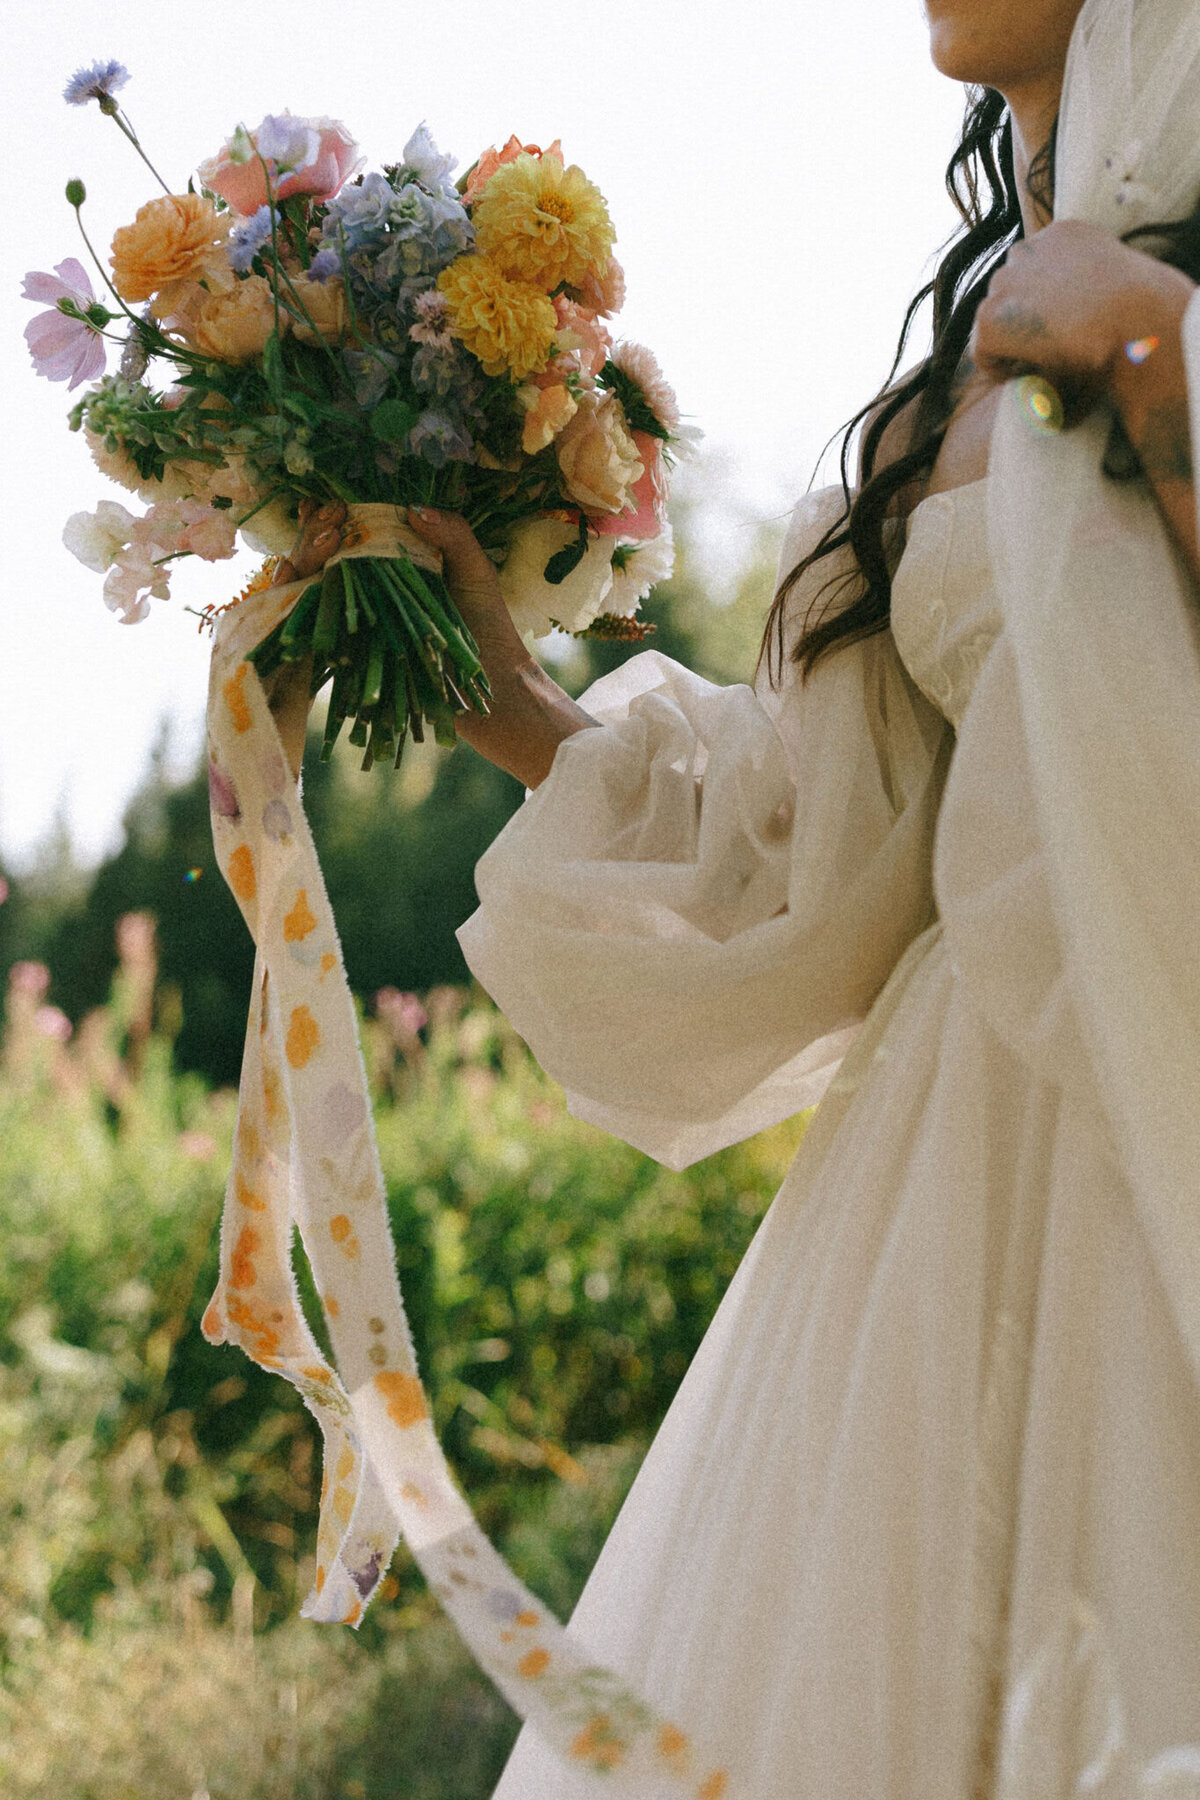 Colourful and bold Spring inspired florals by Moonlight Flowers, trendy and lush floral shop located in Sparwood, BC featured on the Brontë Bride Vendor Guide.